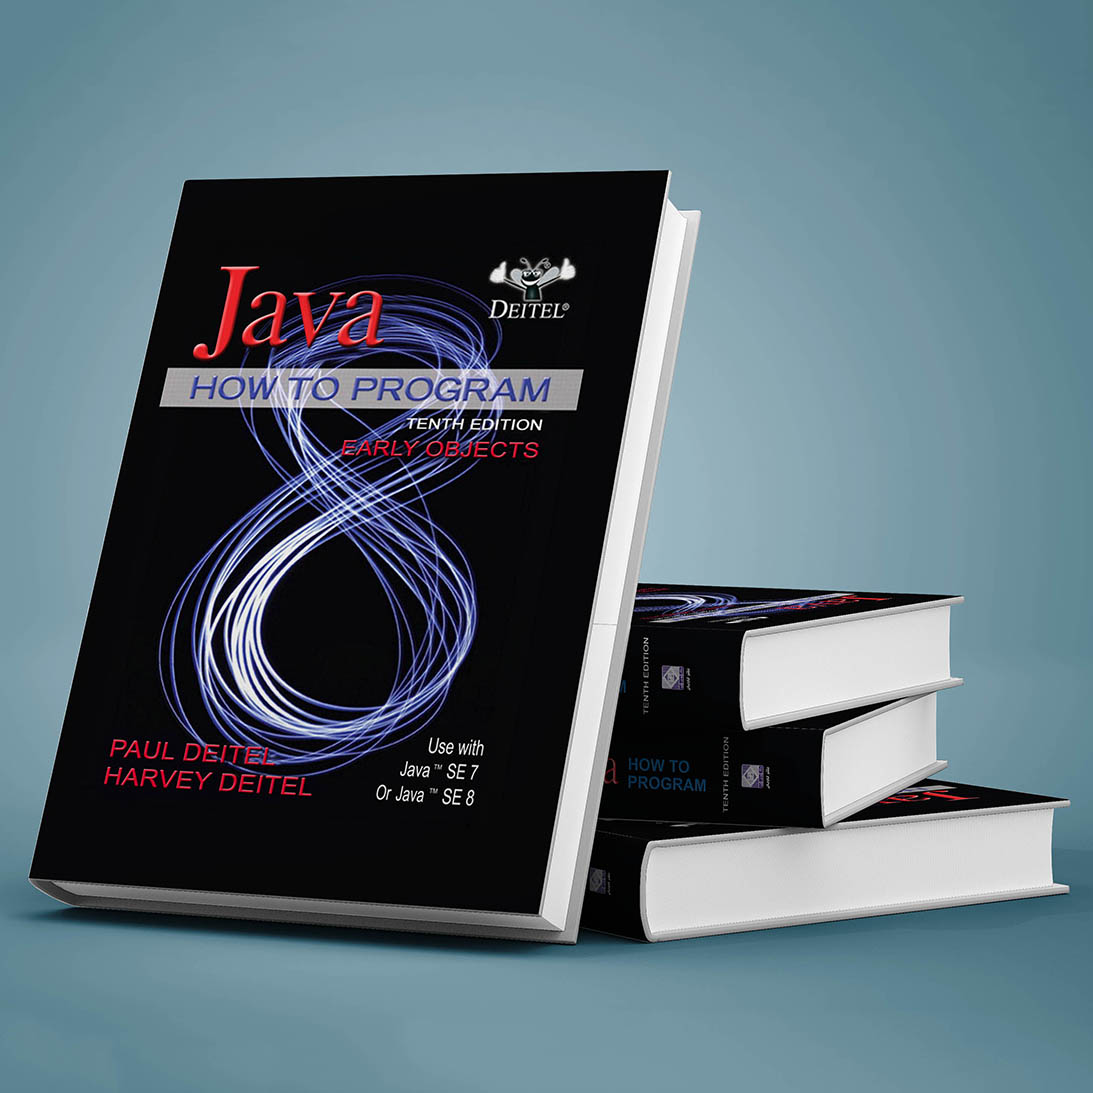 java how to program 11th edition pdf free download